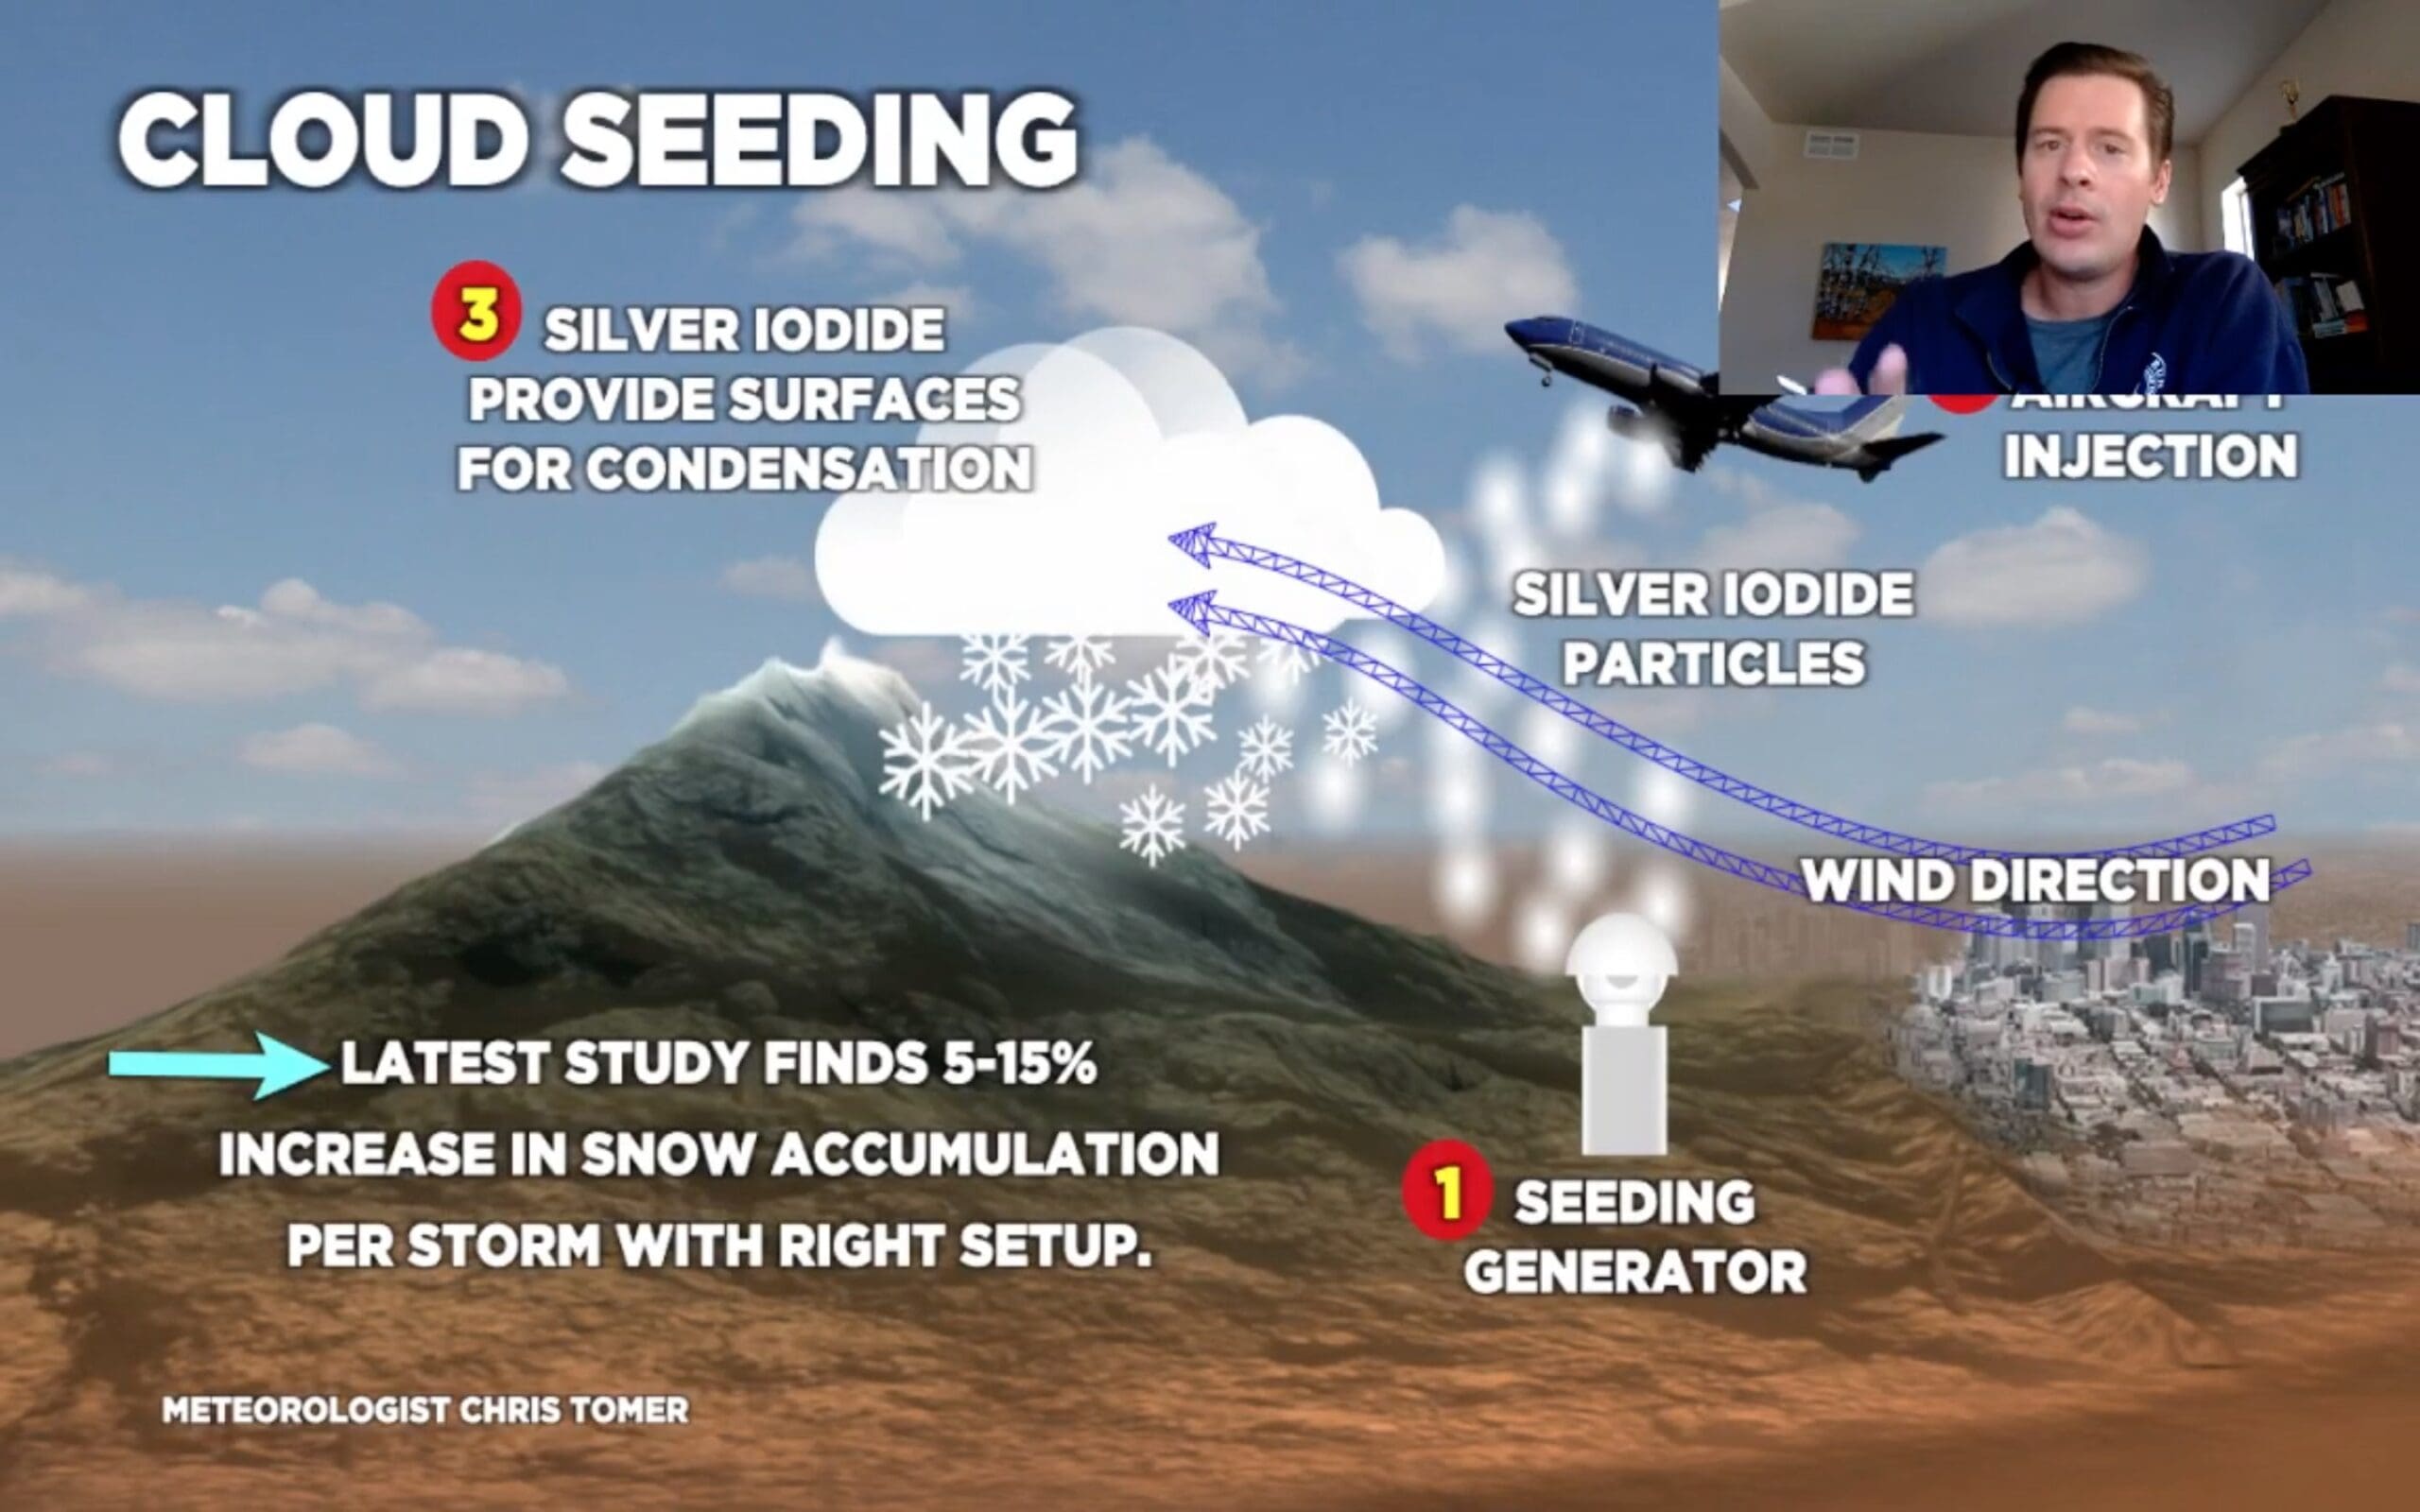 Does Cloud Seeding Actually Work?